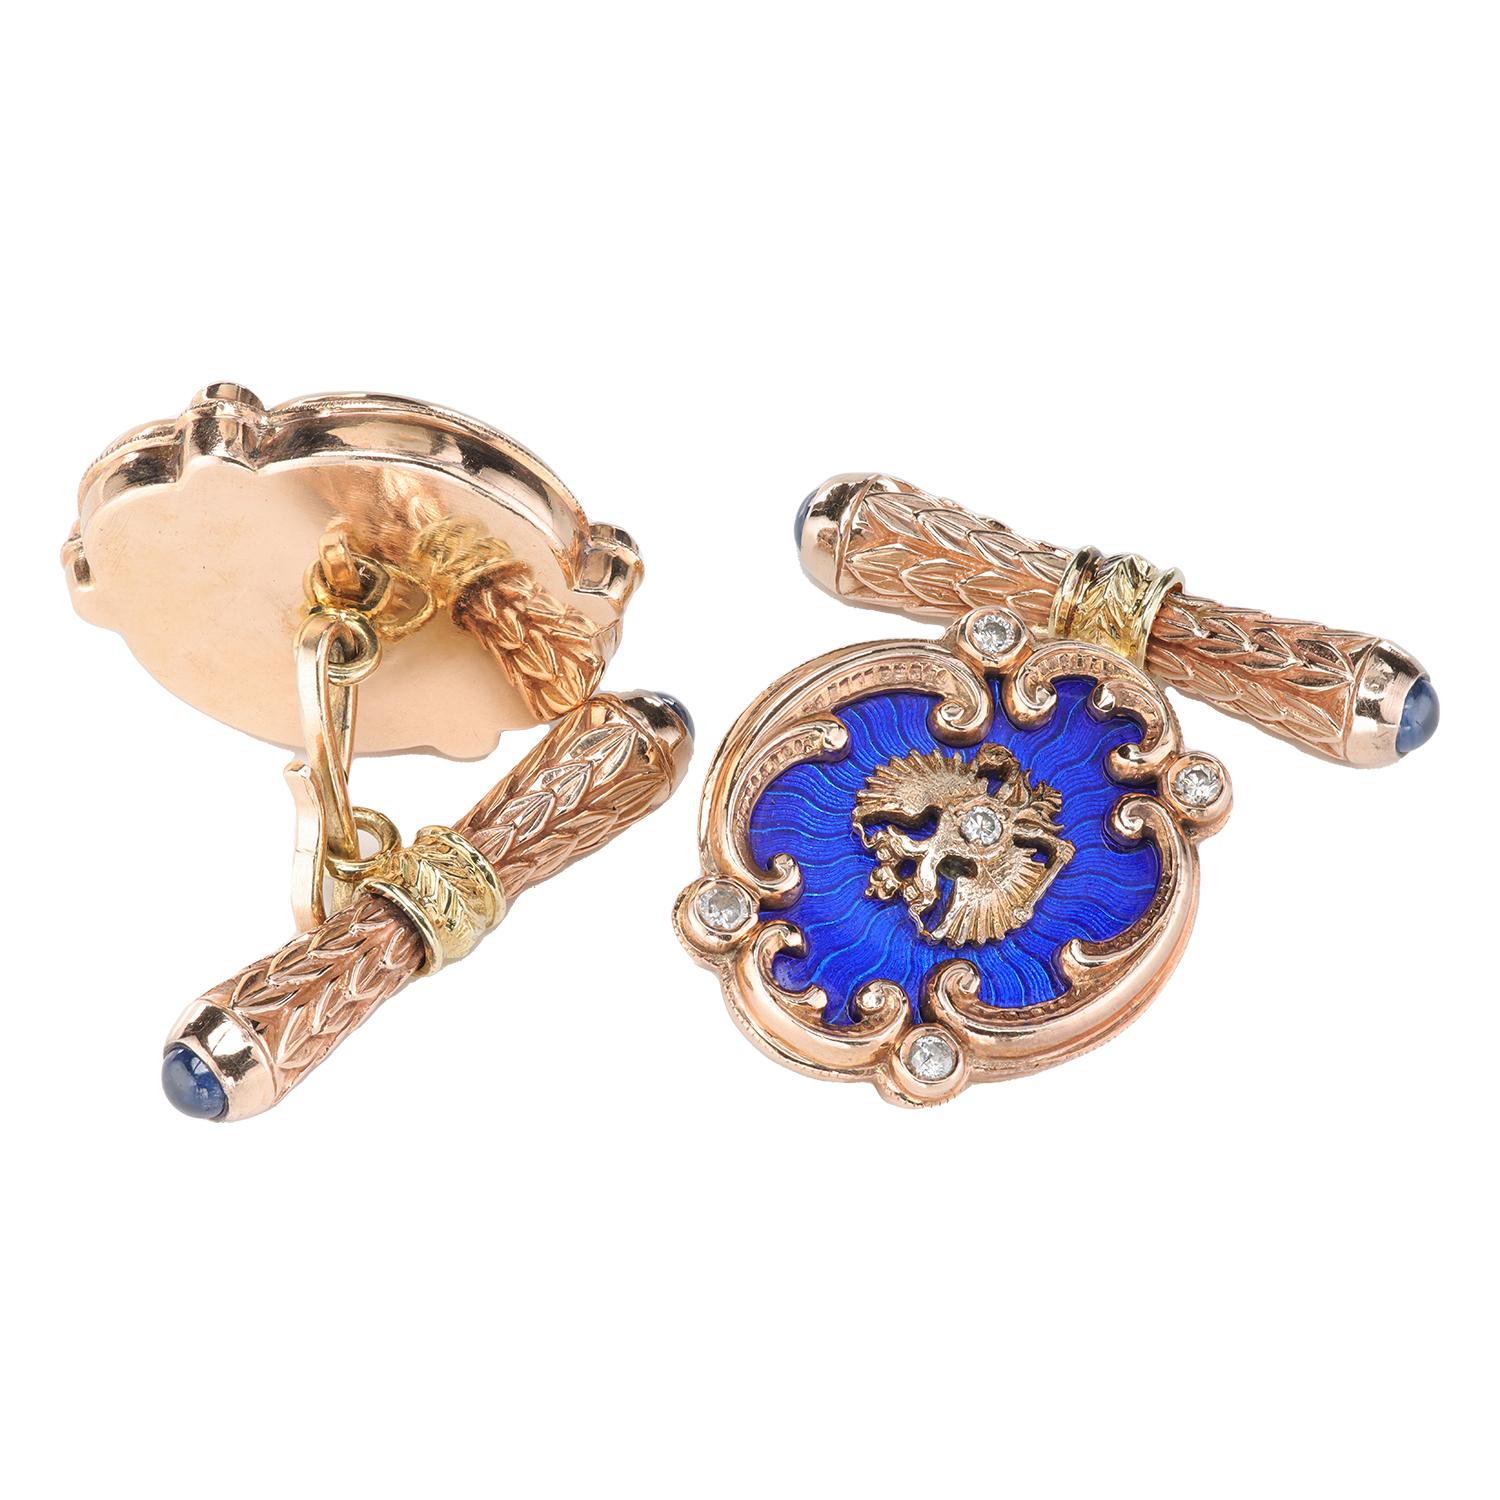 Vintage Russian Imperial-style unisex cufflinks in two-tone gold, topped with royal-blue enamel, diamonds and sapphires. 
The bars are decorated with hand engraving and cab sapphires. Handmade at the end of the last century.

Extremely good,